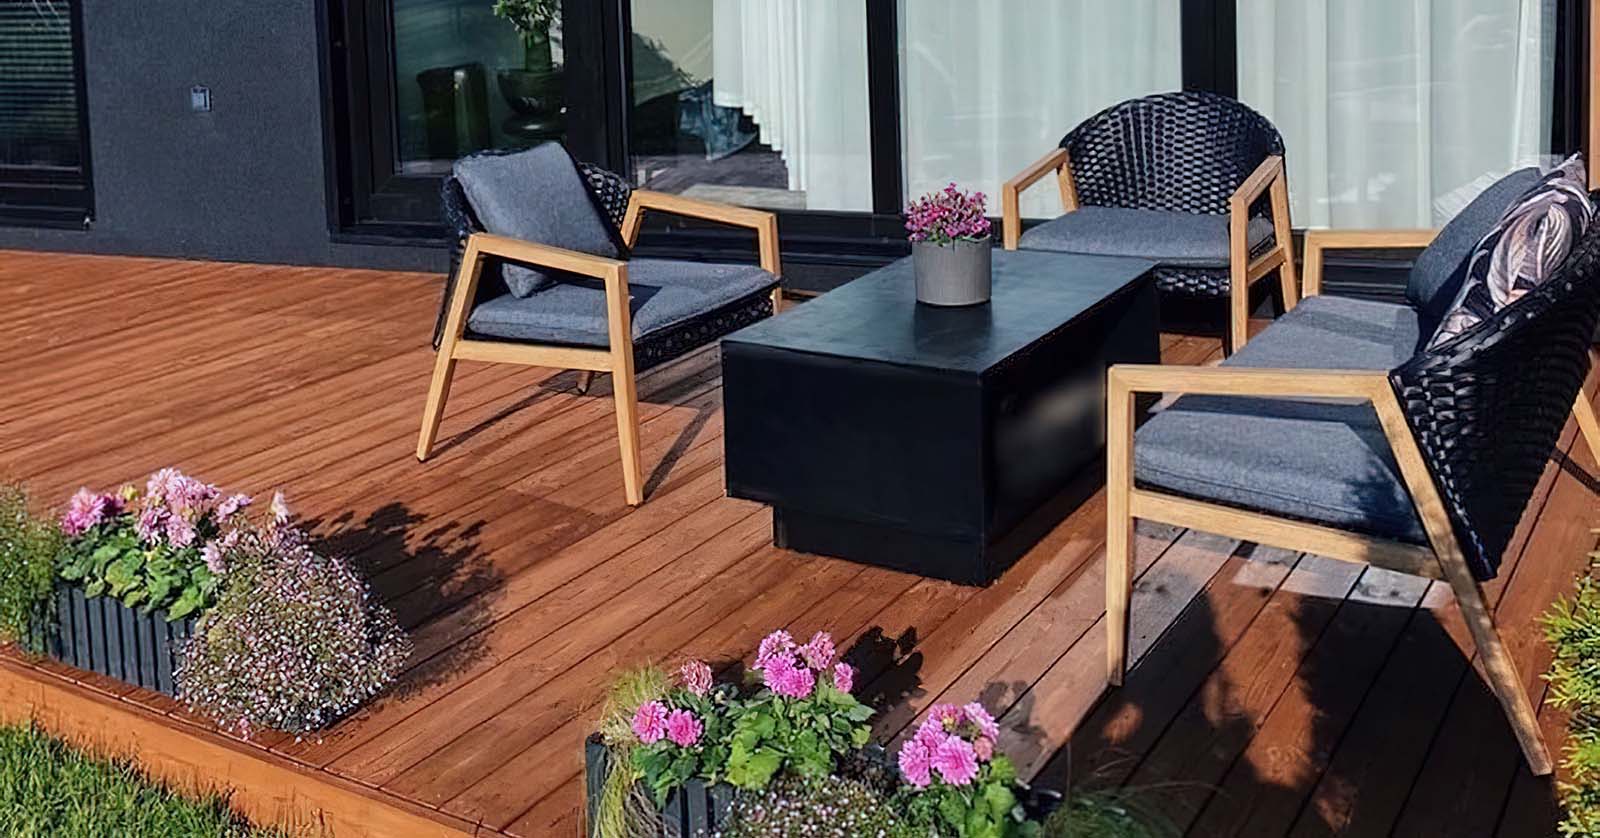 Clear and colour wood stain finishes for wooden decking and other surfaces.